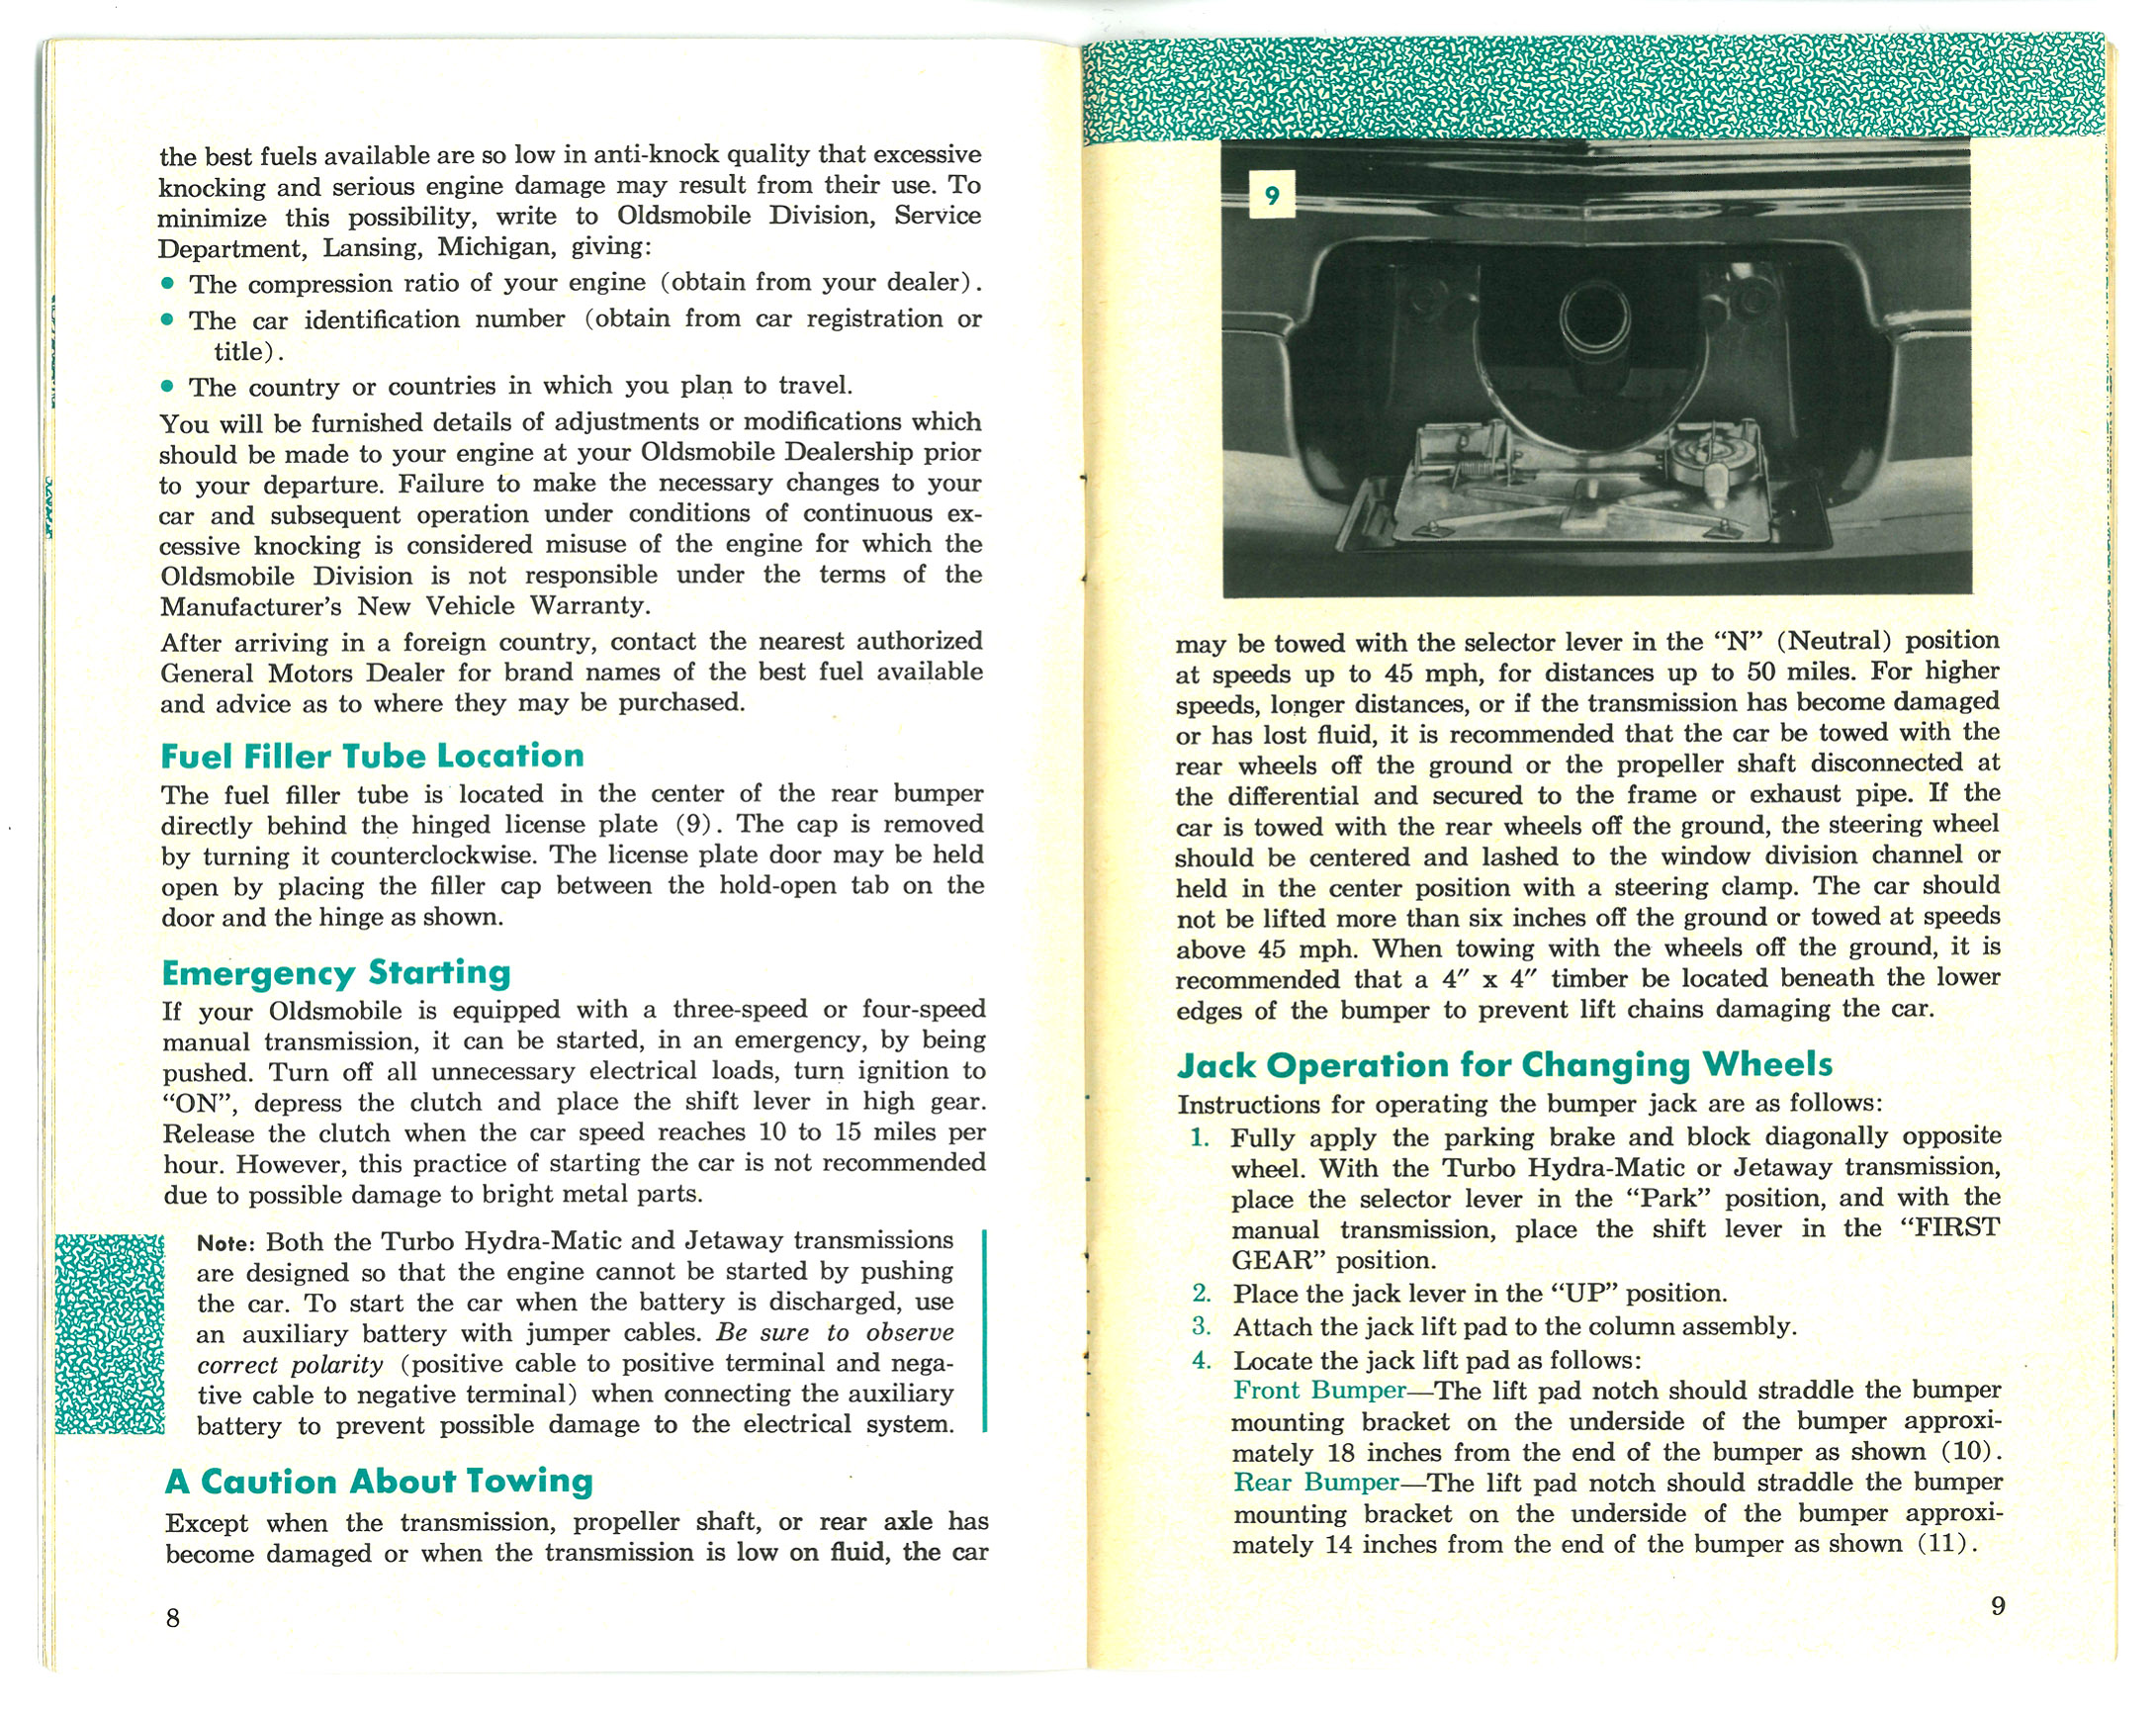 1966_Oldsmobile_owner_operating_manual_Page_06